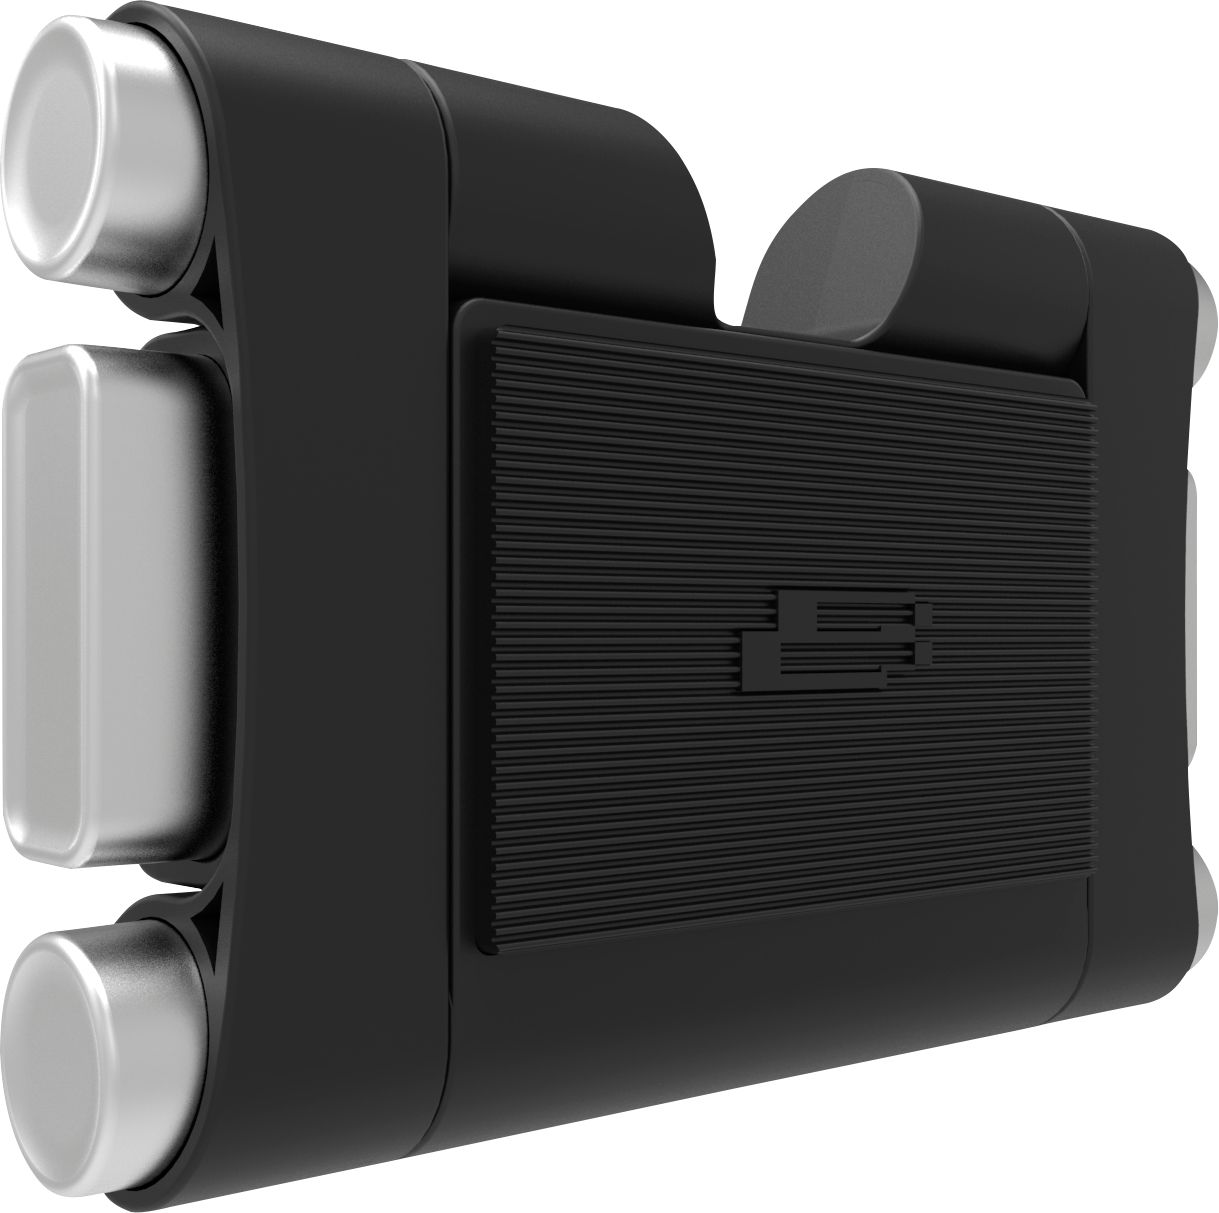 Angle View: Bracketron - Roadtripper Travel Mount for Most Smartphones and Tablets Up to 10.1" - Black And Silver